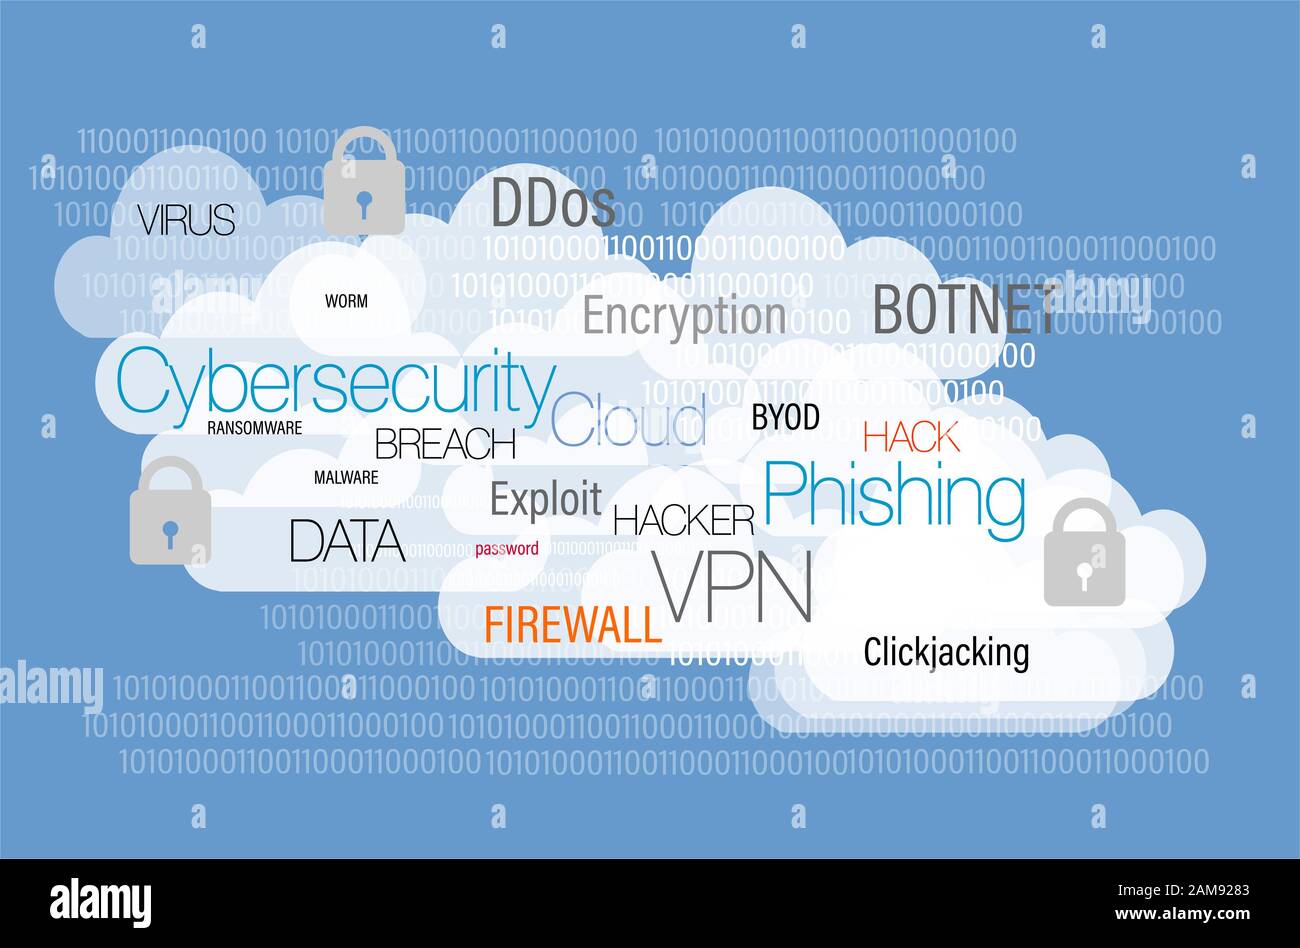 Cybersecurity vector on a blue background Stock Photo